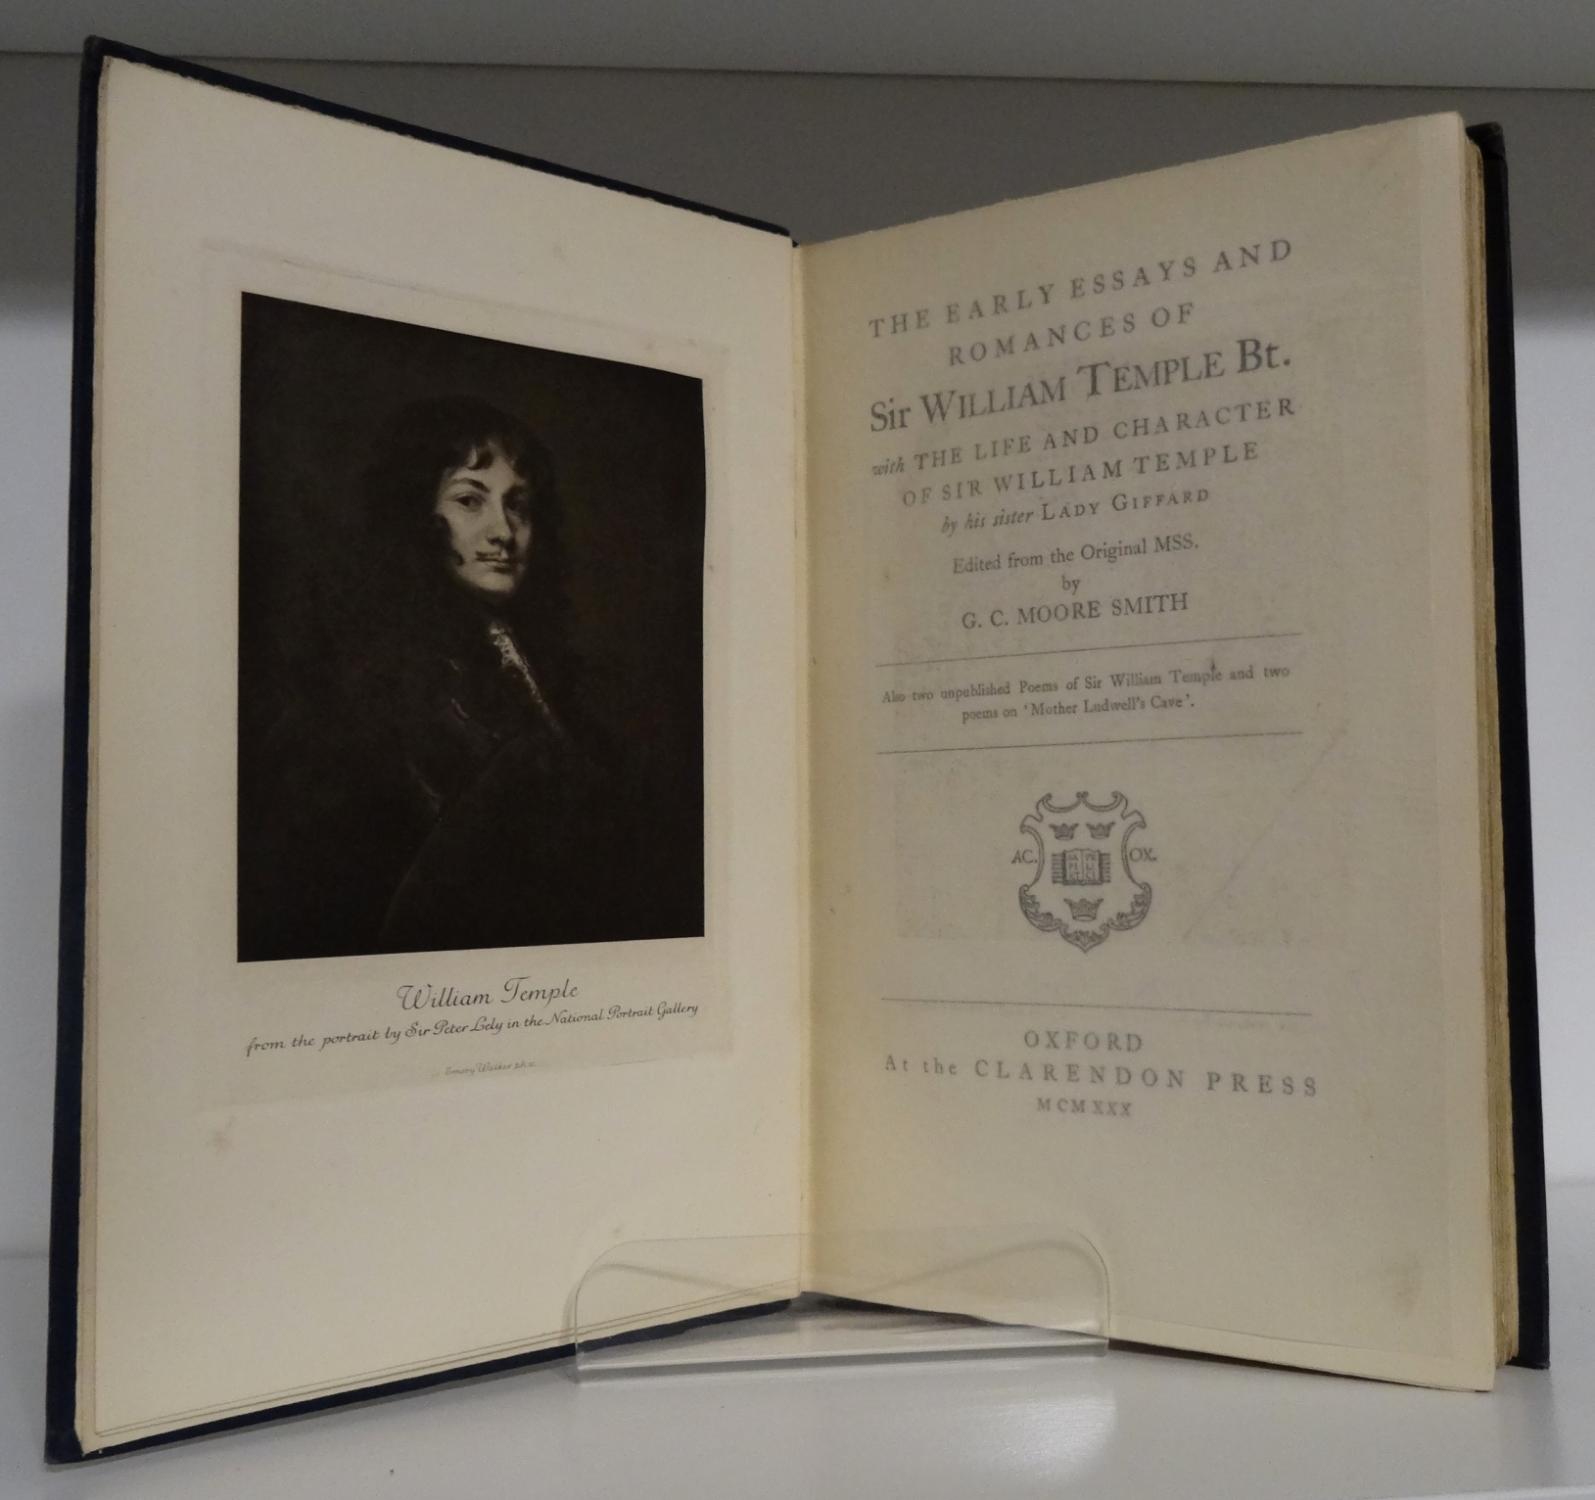 THE EARLY ESSAYS AND ROMANCES OF SIR WILLIAM TEMPLE BT. WITH THE LIFE ...